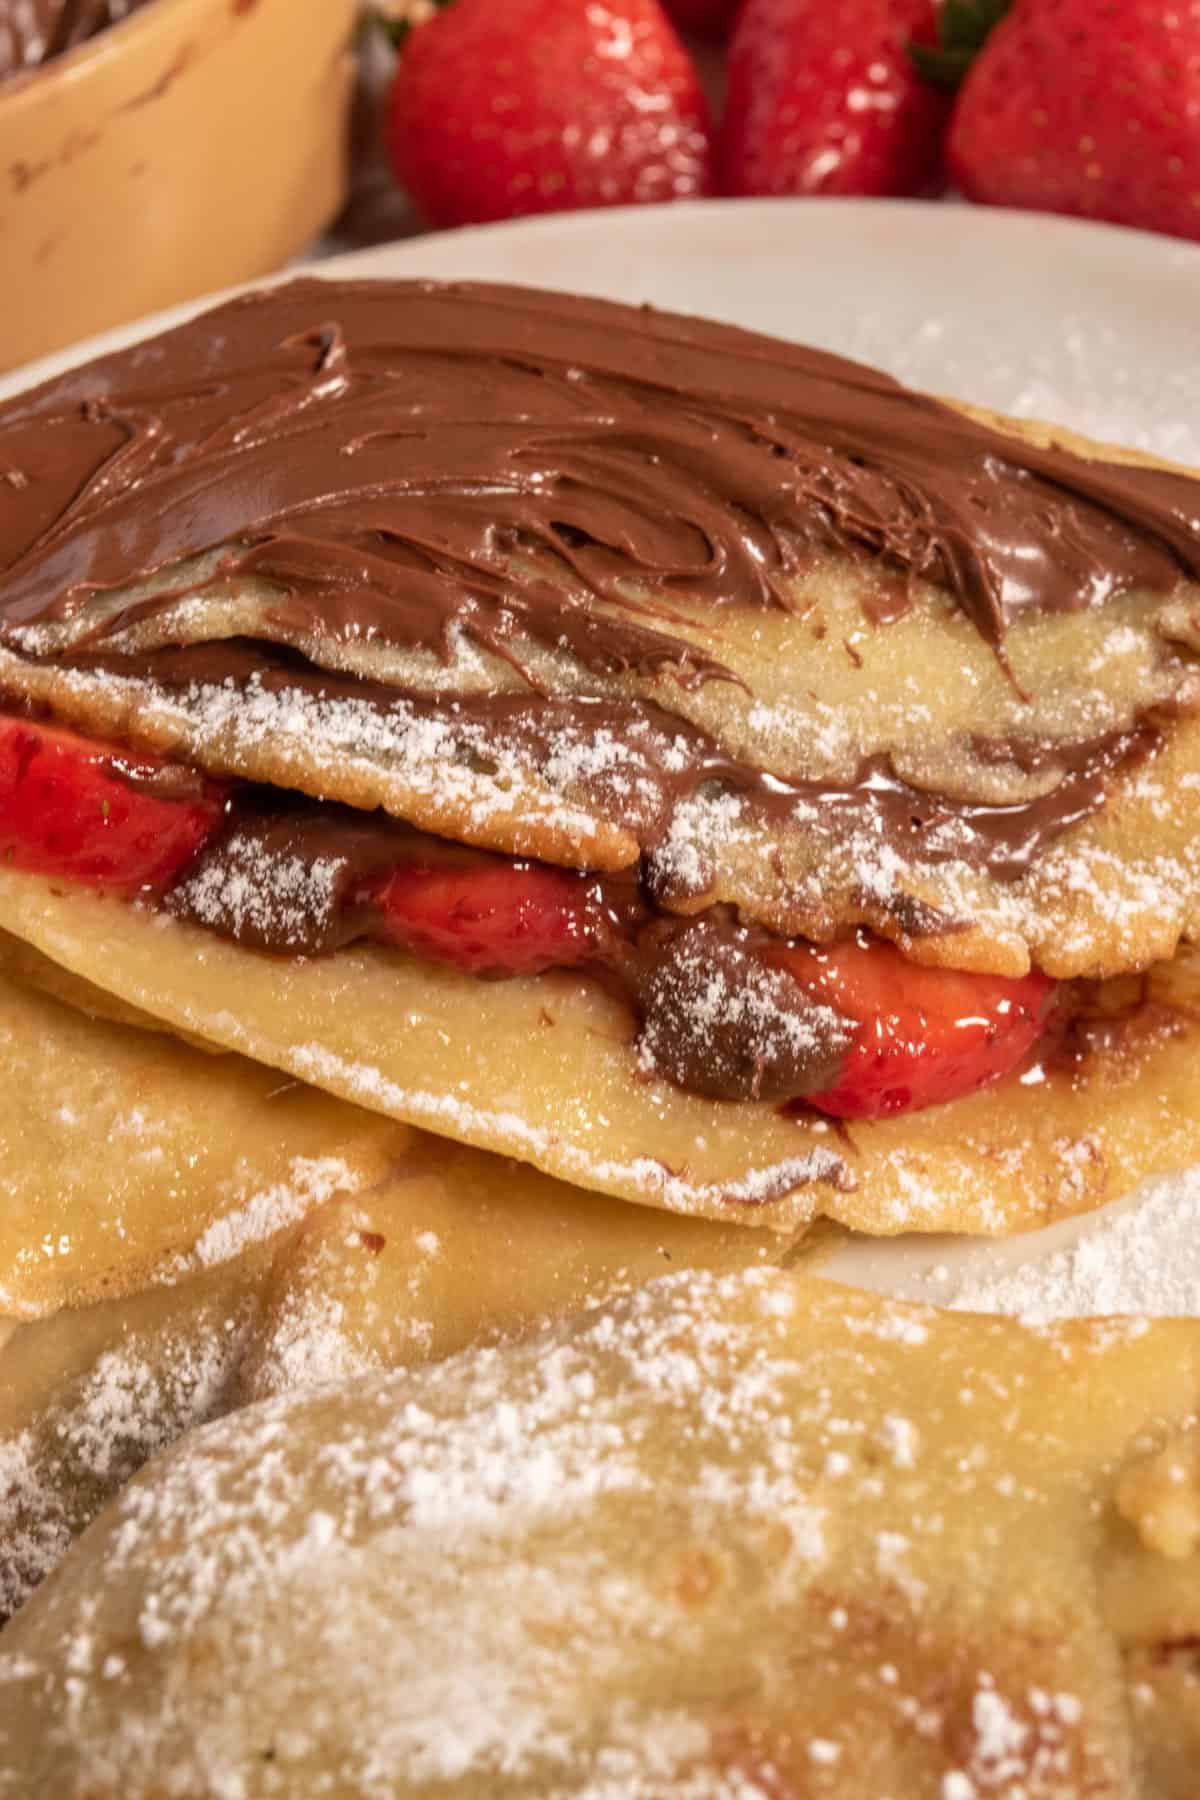 A single chocolate covered crepe which is filled with lot of fresh strawberries and even more chocolate. 